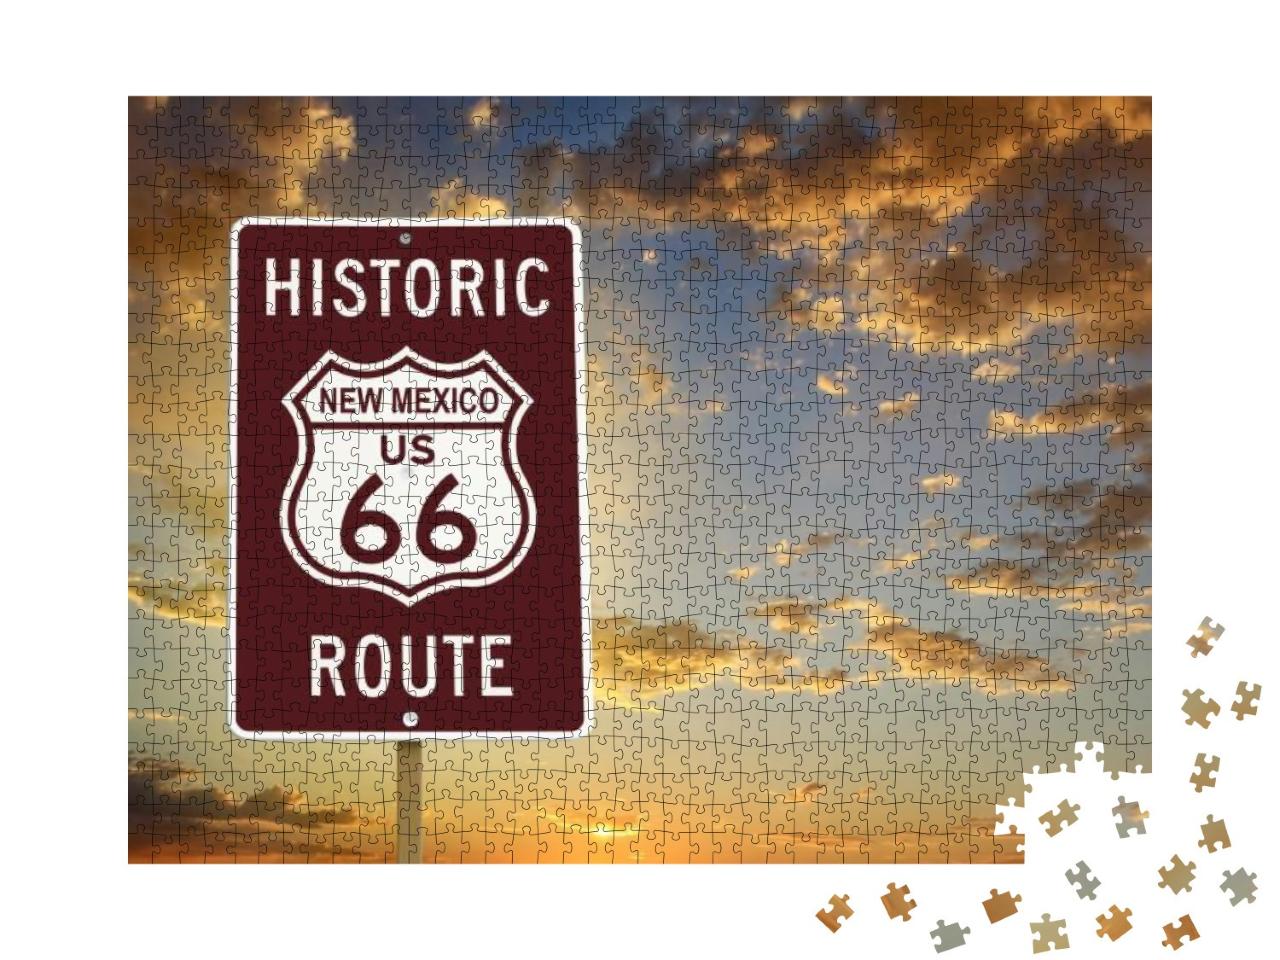 Historic New Mexico Route 66 Brown Sign with Sunset... Jigsaw Puzzle with 1000 pieces